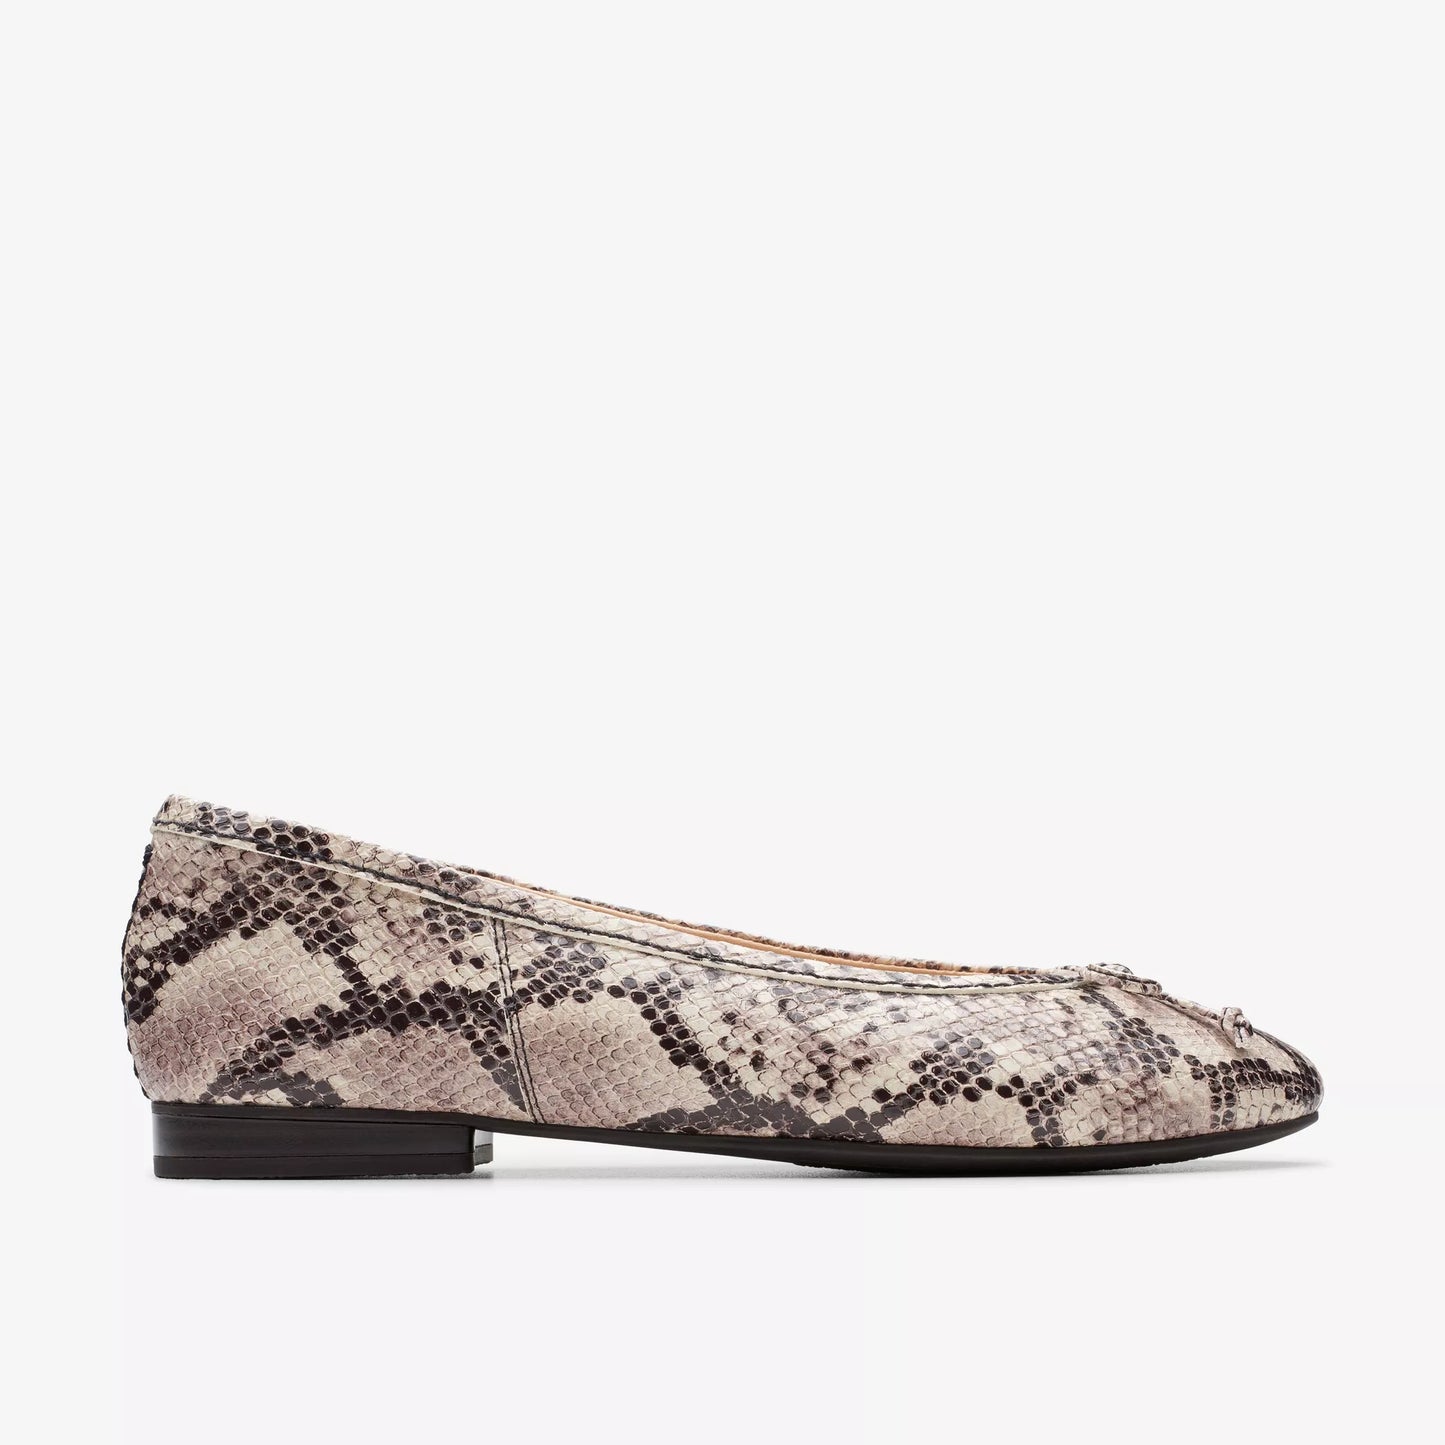 Side view of the Clarks Snake Print Fawna Lily Ballet Shoe